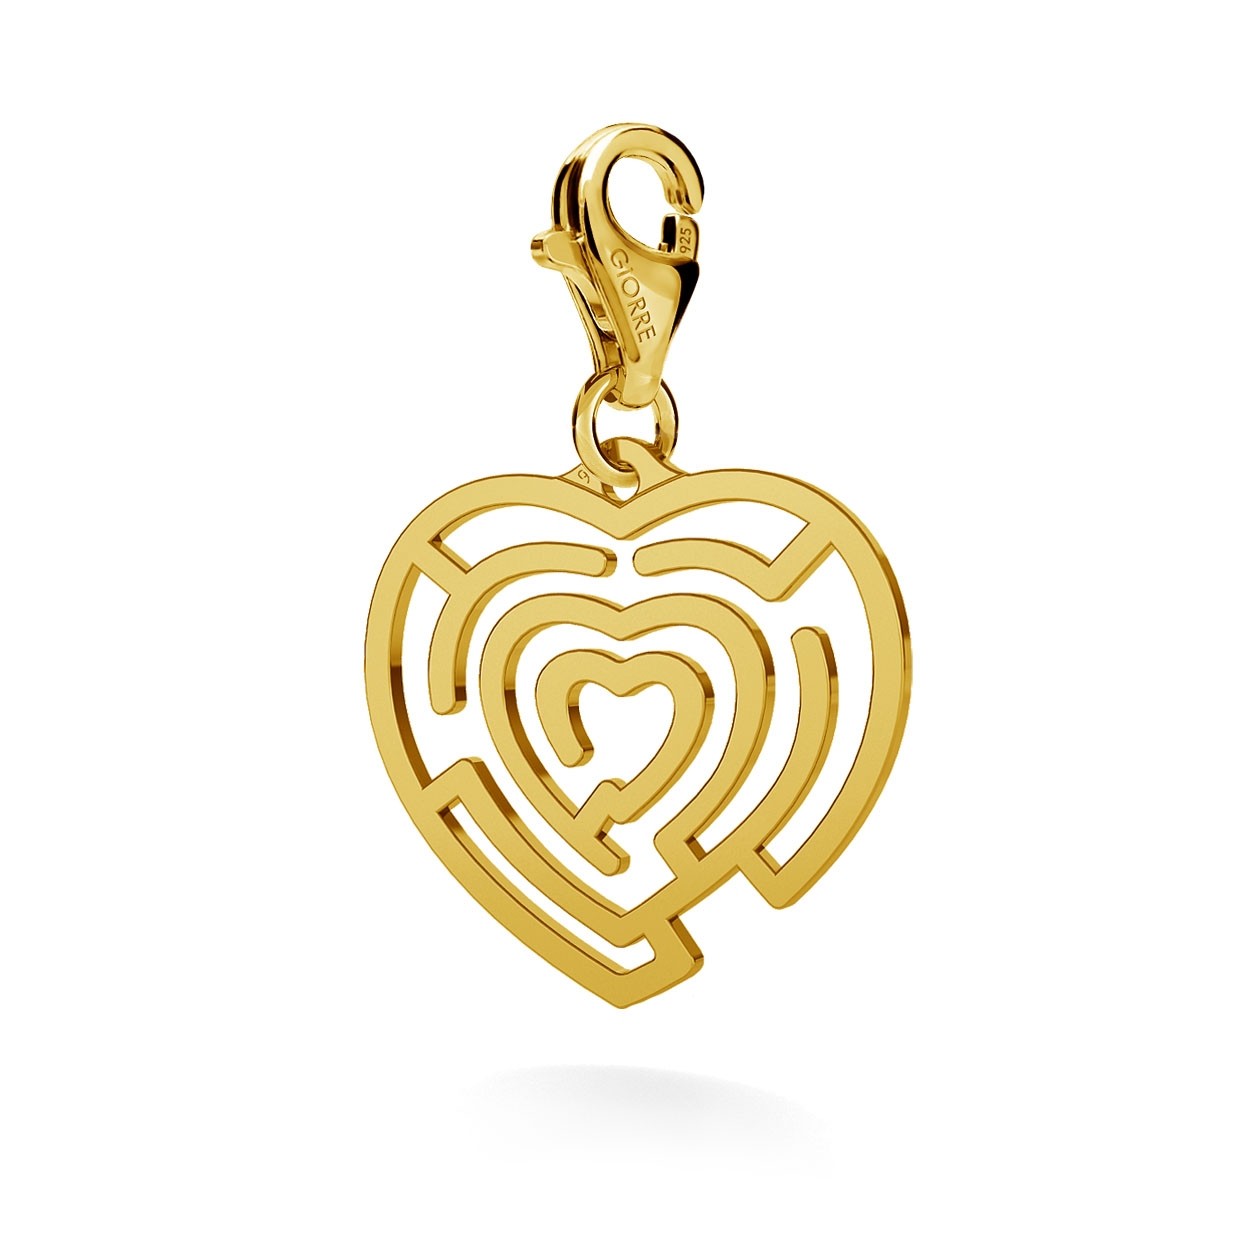 CHARM 24, HEART LABYRINTH, SILVER 925, RHODIUM OR GOLD PLATED